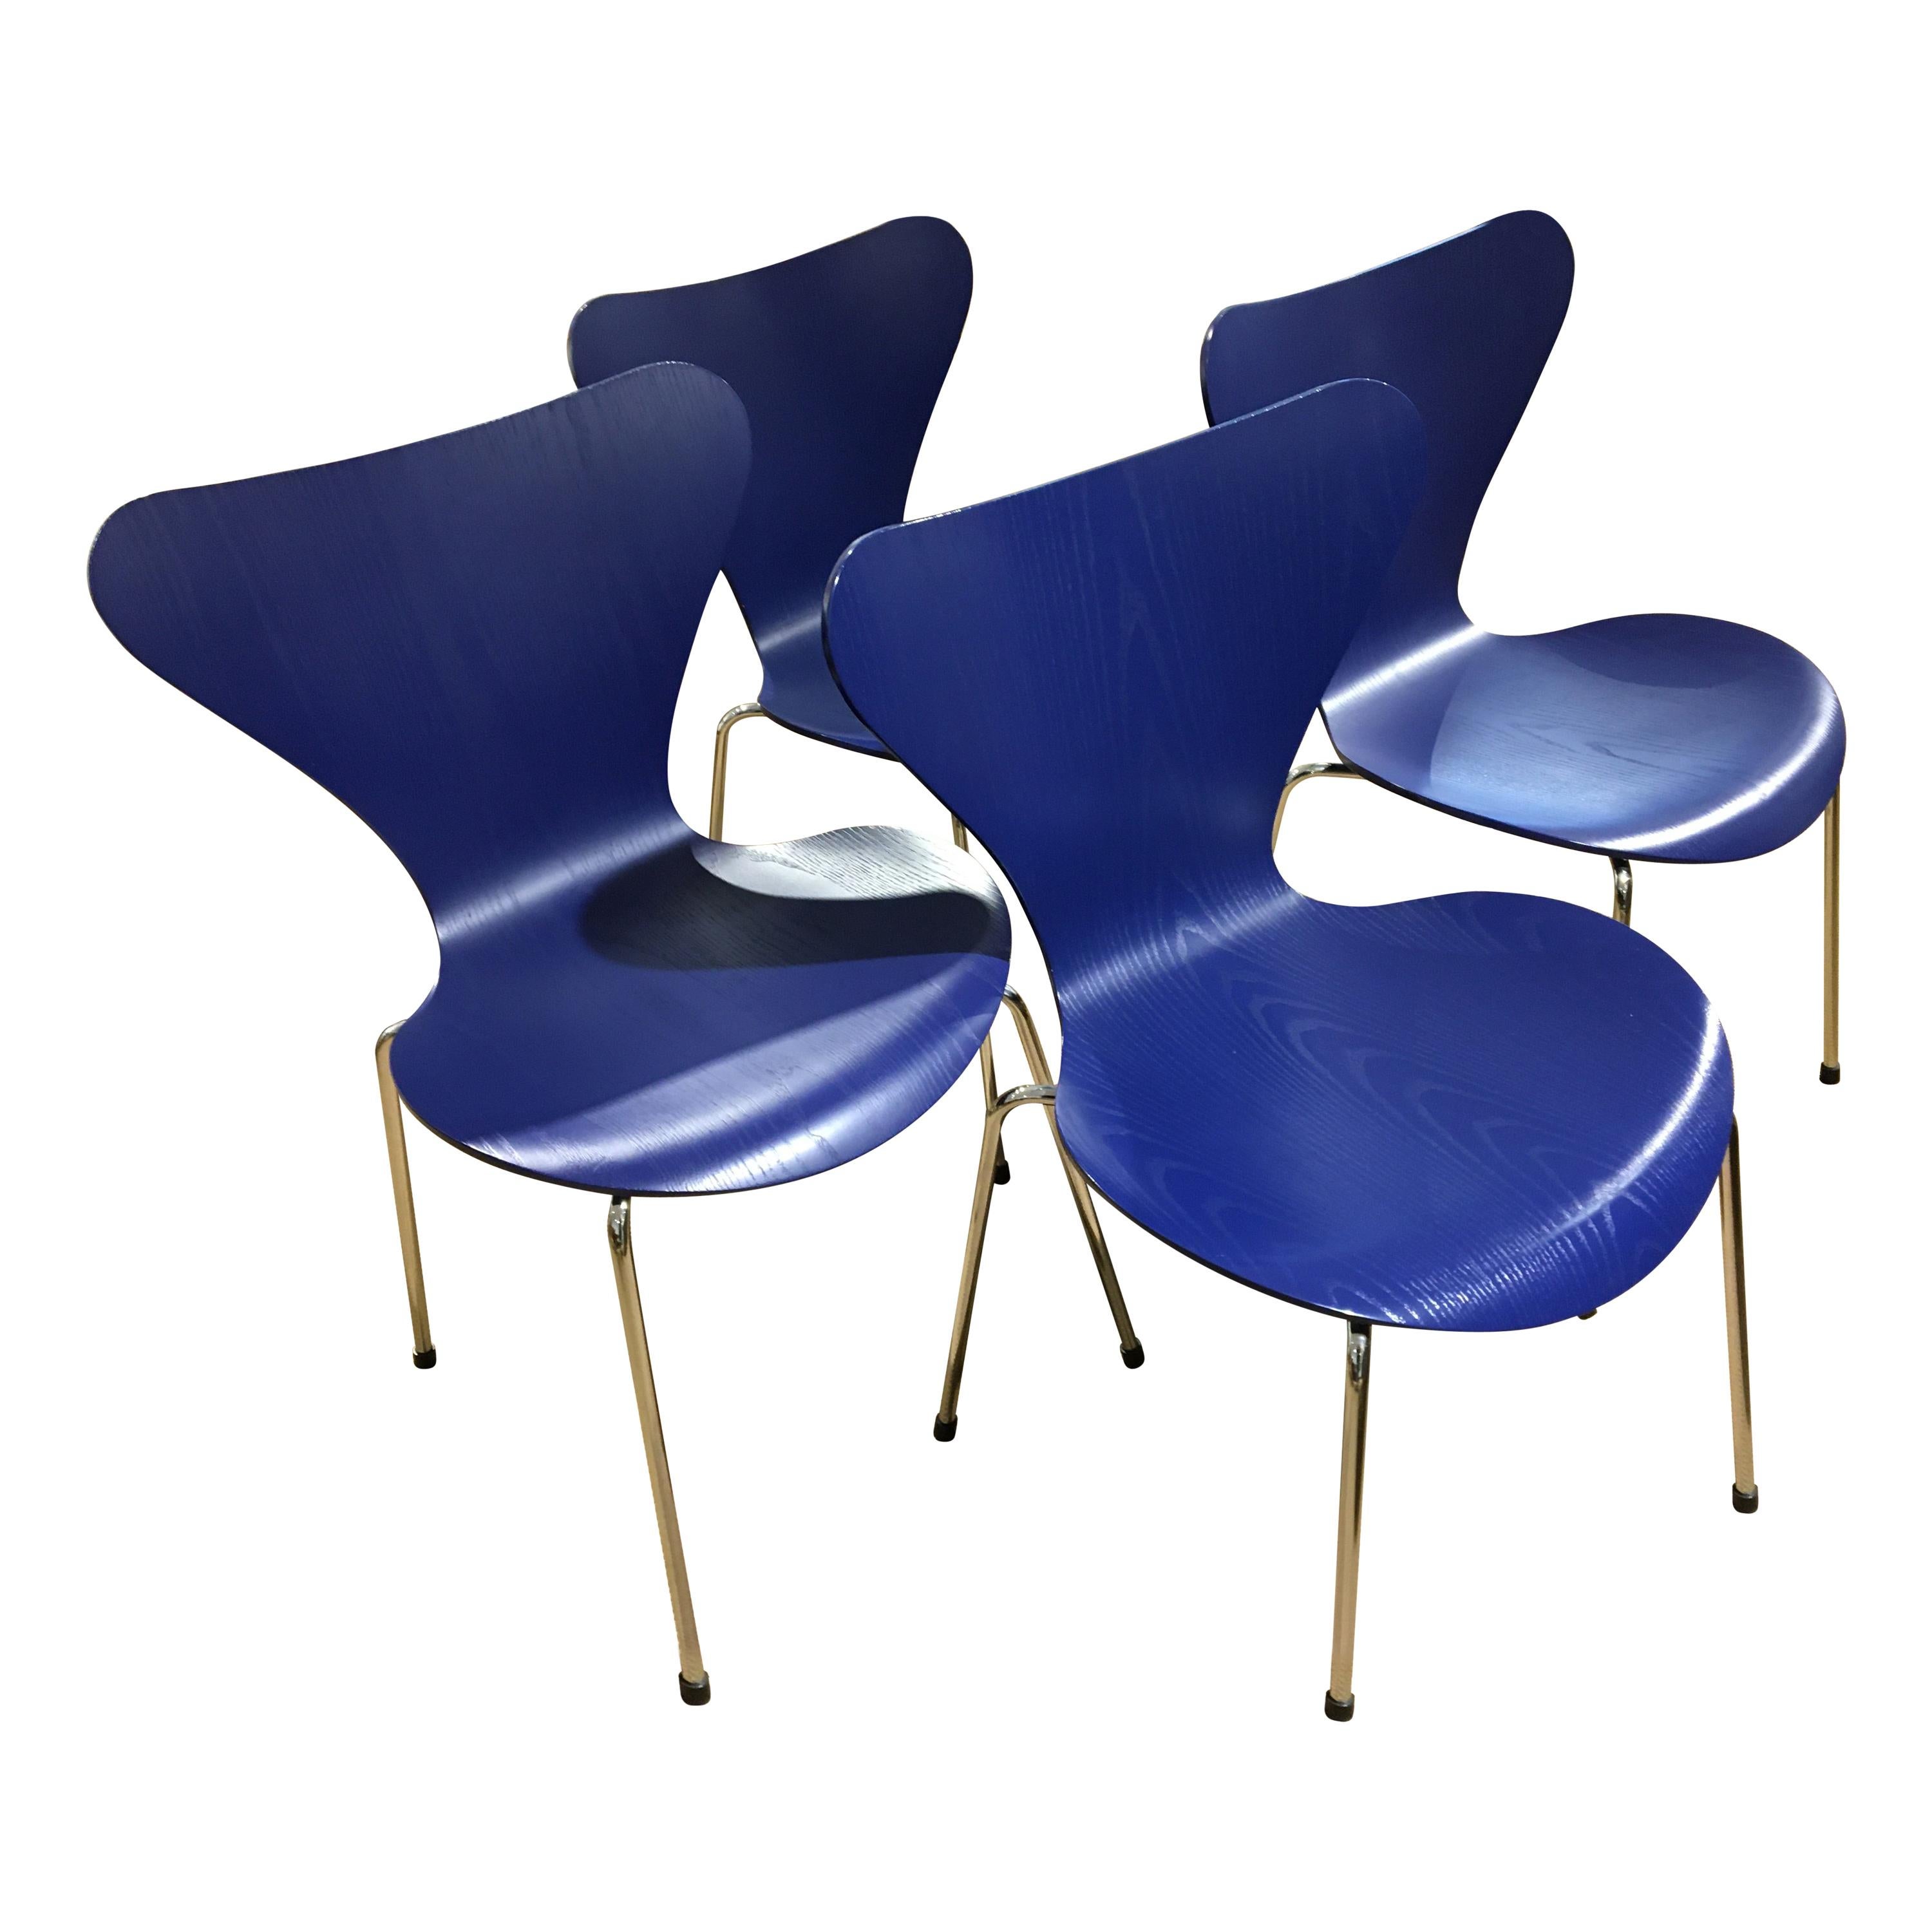 Arne Jacobsen Dining Chairs 4 Pcs, Aj 3107 in Blue